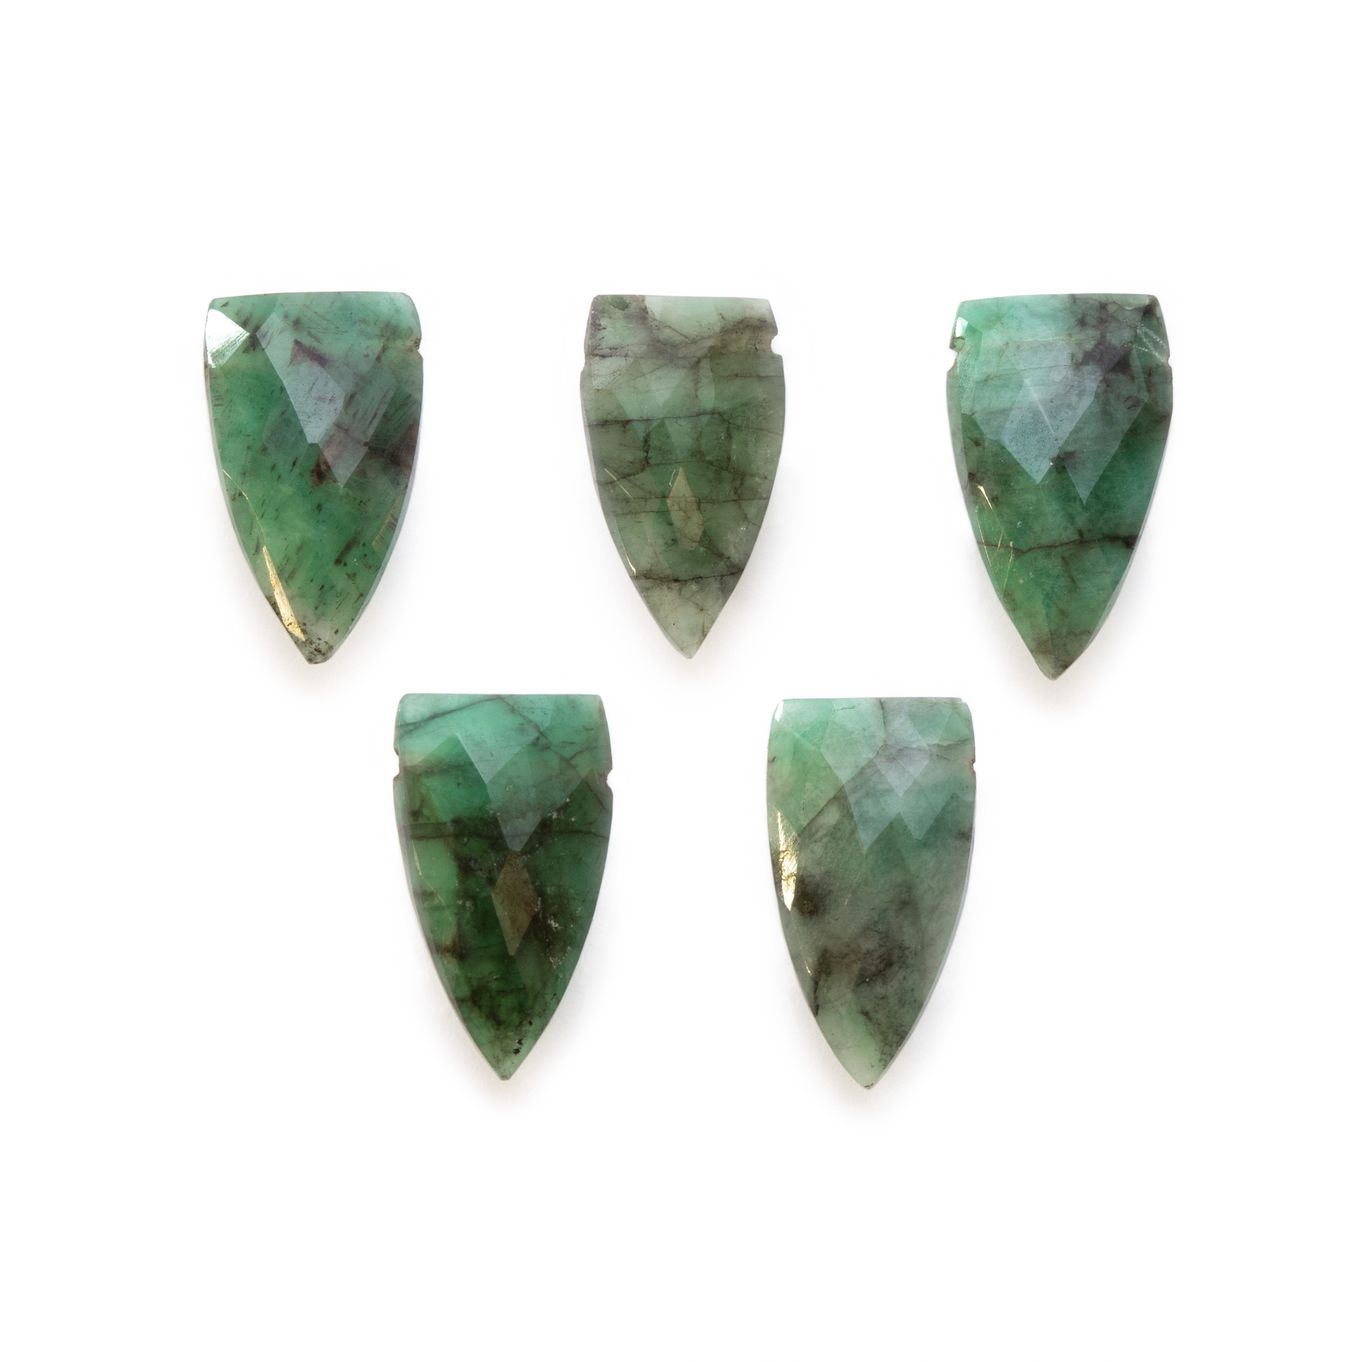 Emerald Faceted Shield Shaped Beads - Approx 14.5mmx8.5mm